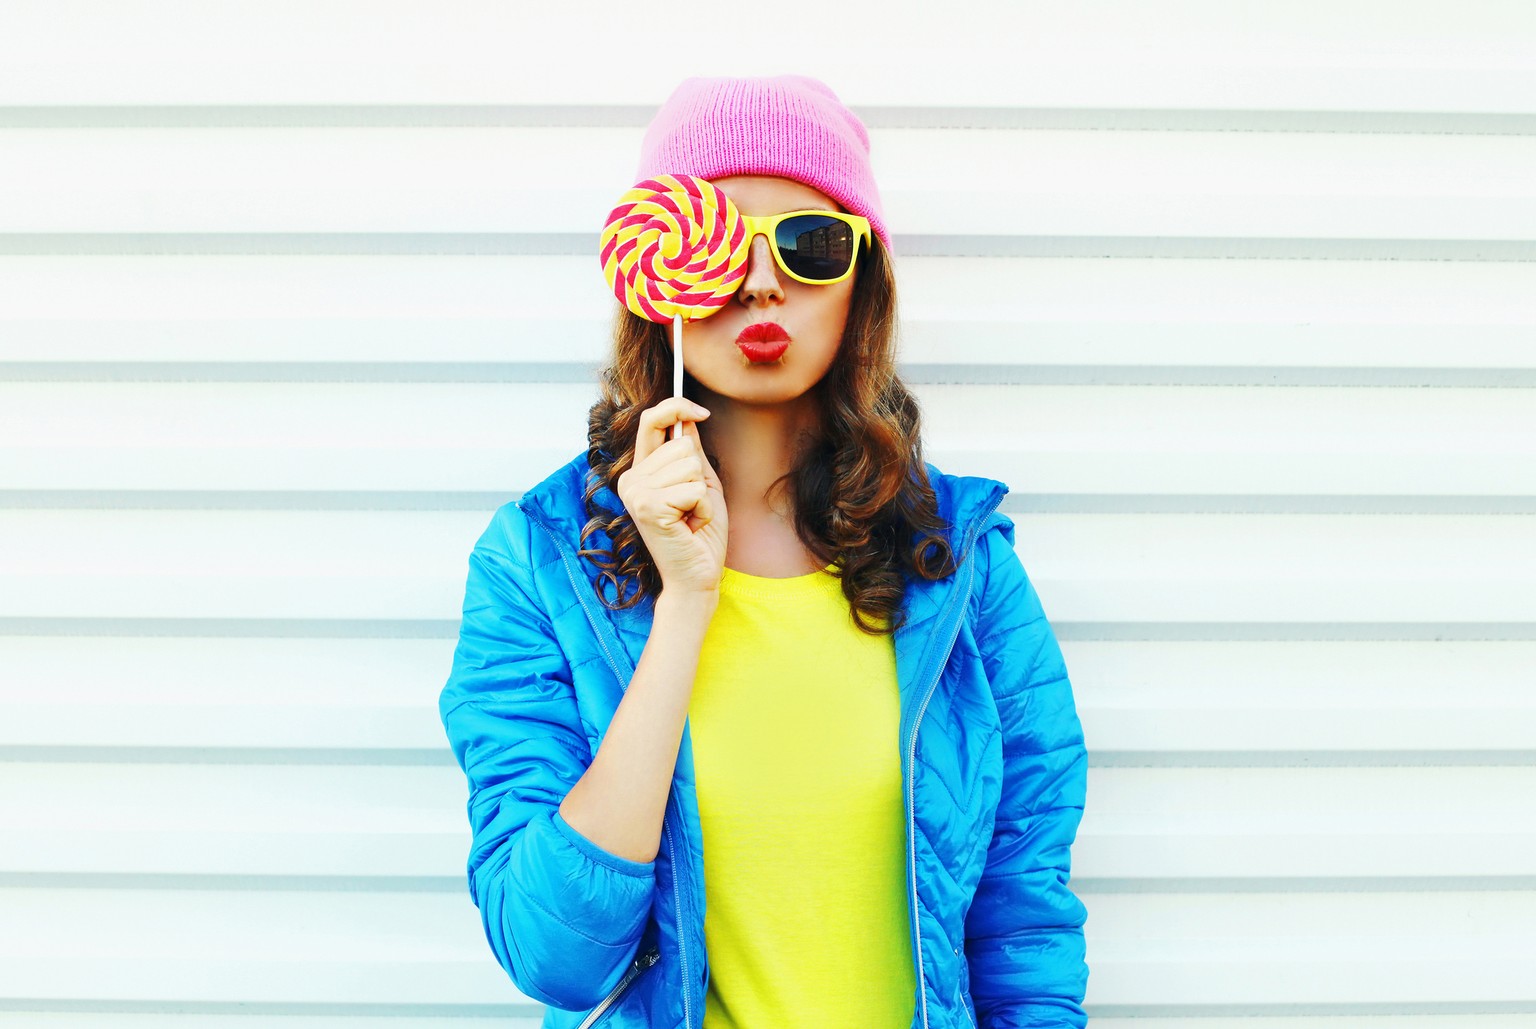 Portrait fashion pretty cool woman with lollipop in colorful clothes over white background wearing a pink hat yellow sunglasses and blue jacket